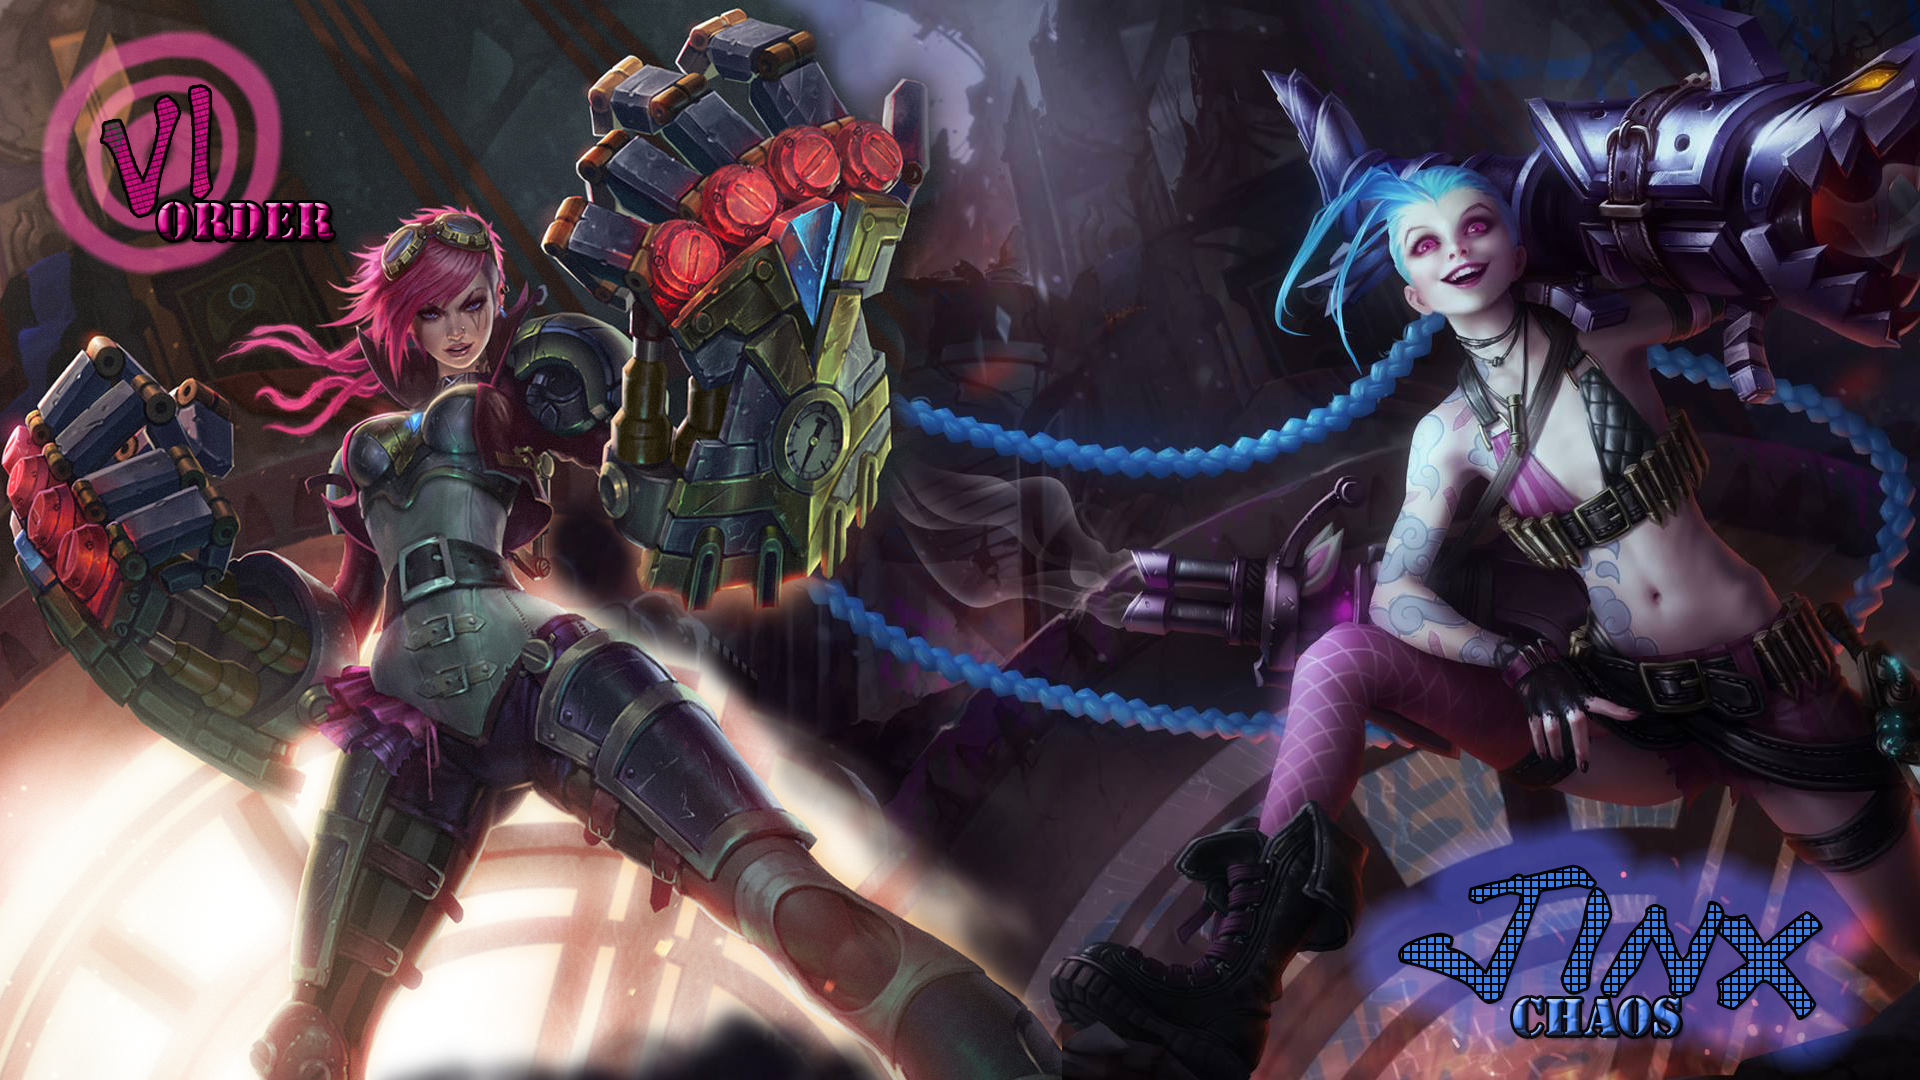 General 1920x1080 Vi (League of Legends) video games Jinx (League of Legends) League of Legends PC gaming belly two women video game girls long hair inked girls video game characters